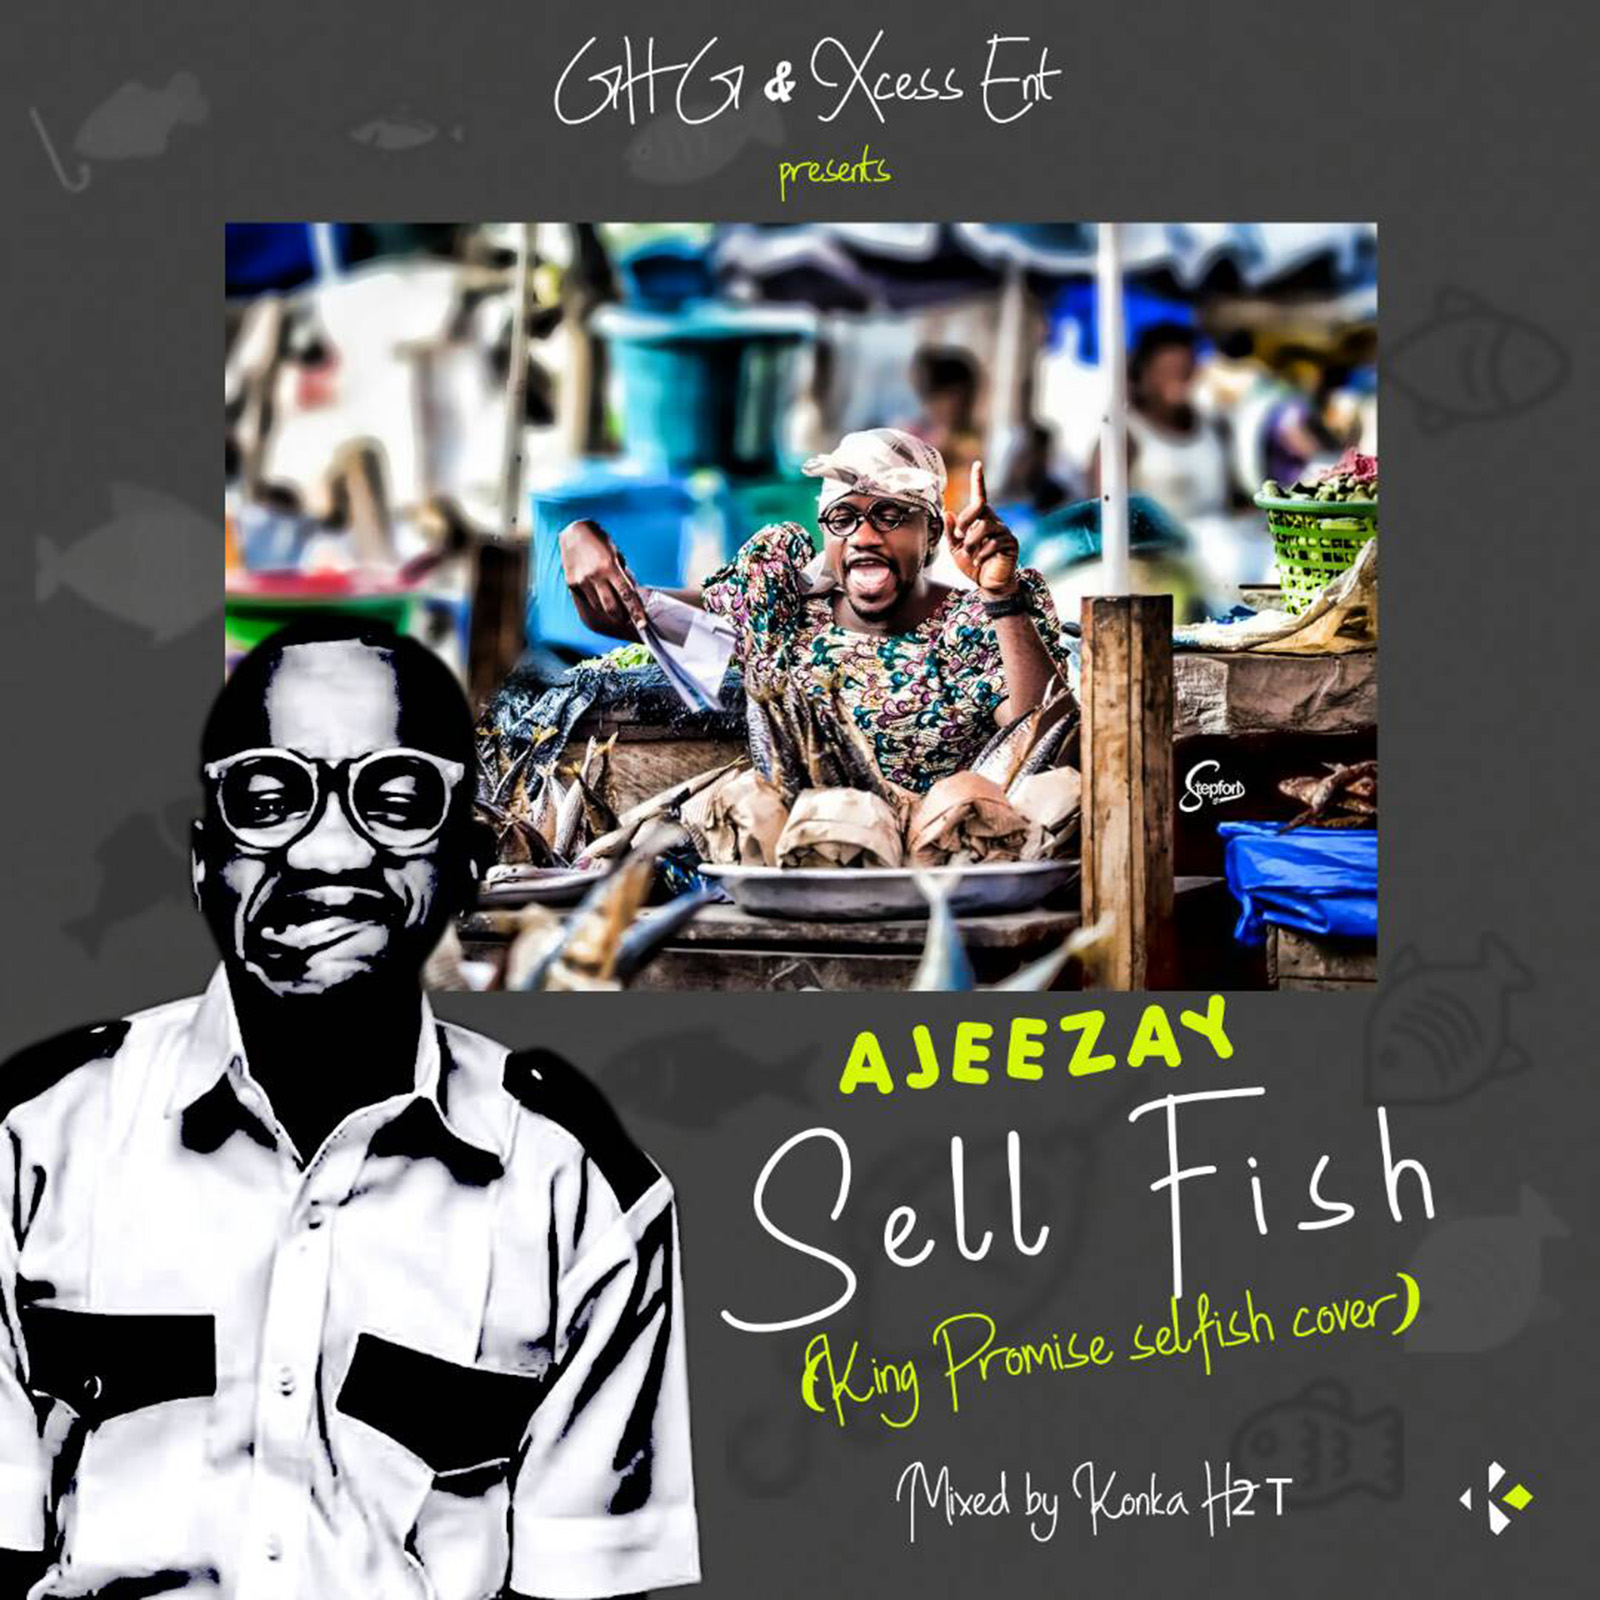 Selfish (King Promise Cover) by Ajeezay